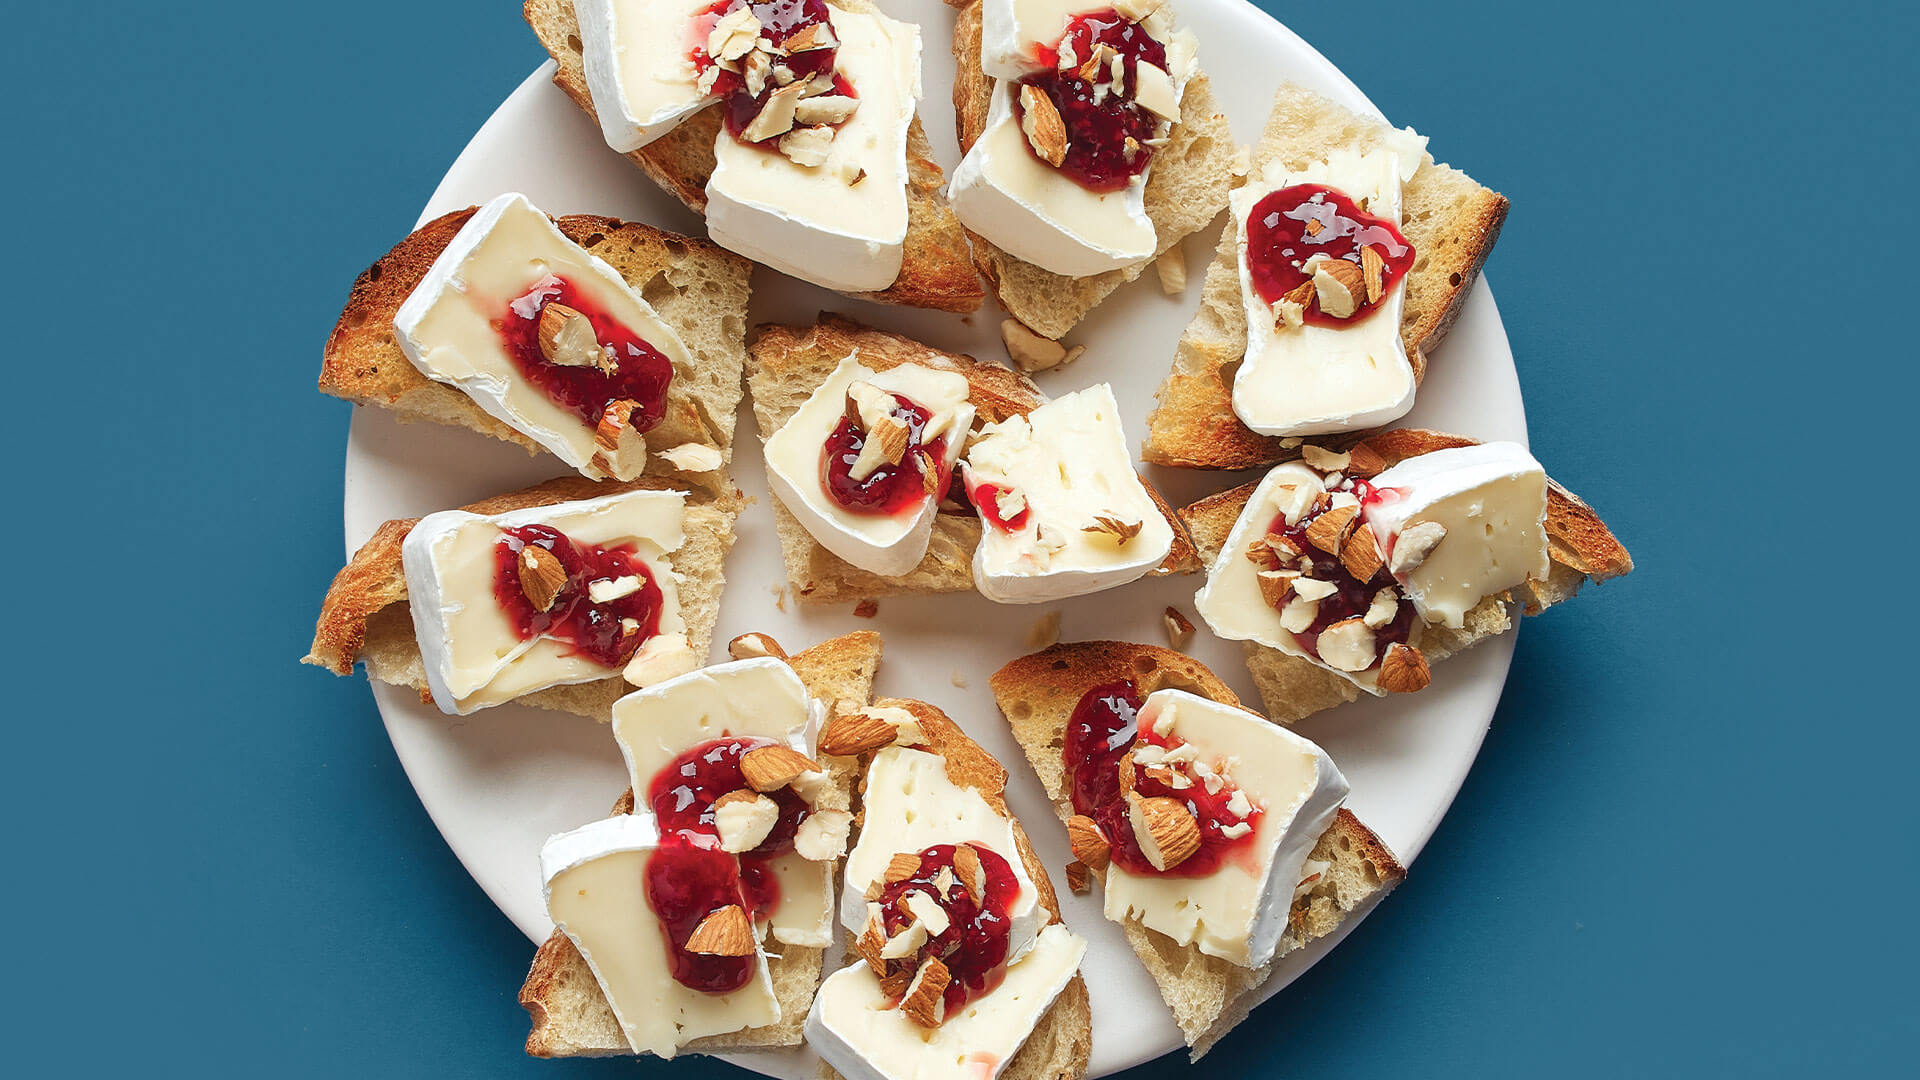 A delicious tray of crostini paired with brie cheese and spicy pepper jelly.